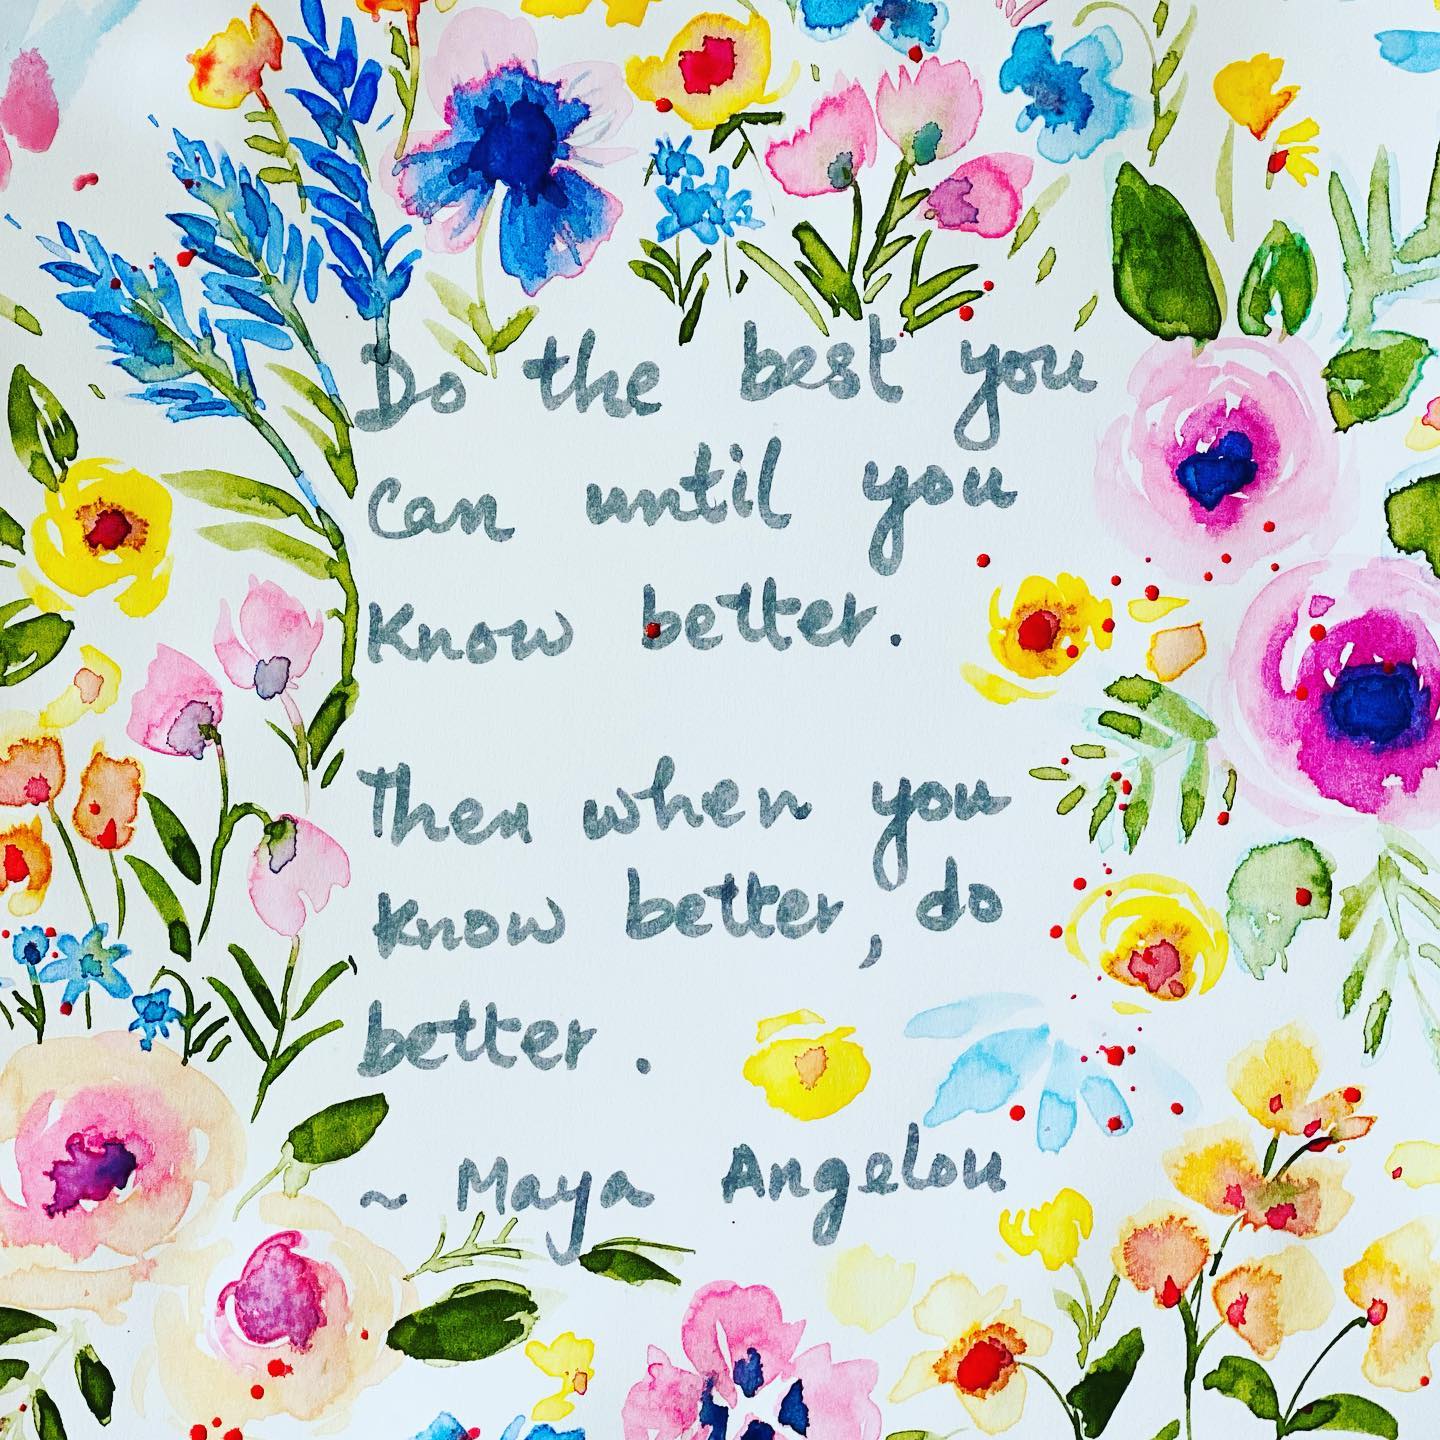 Do the best until you know better.
Then when you know better, do better.
~ Maya Angelou